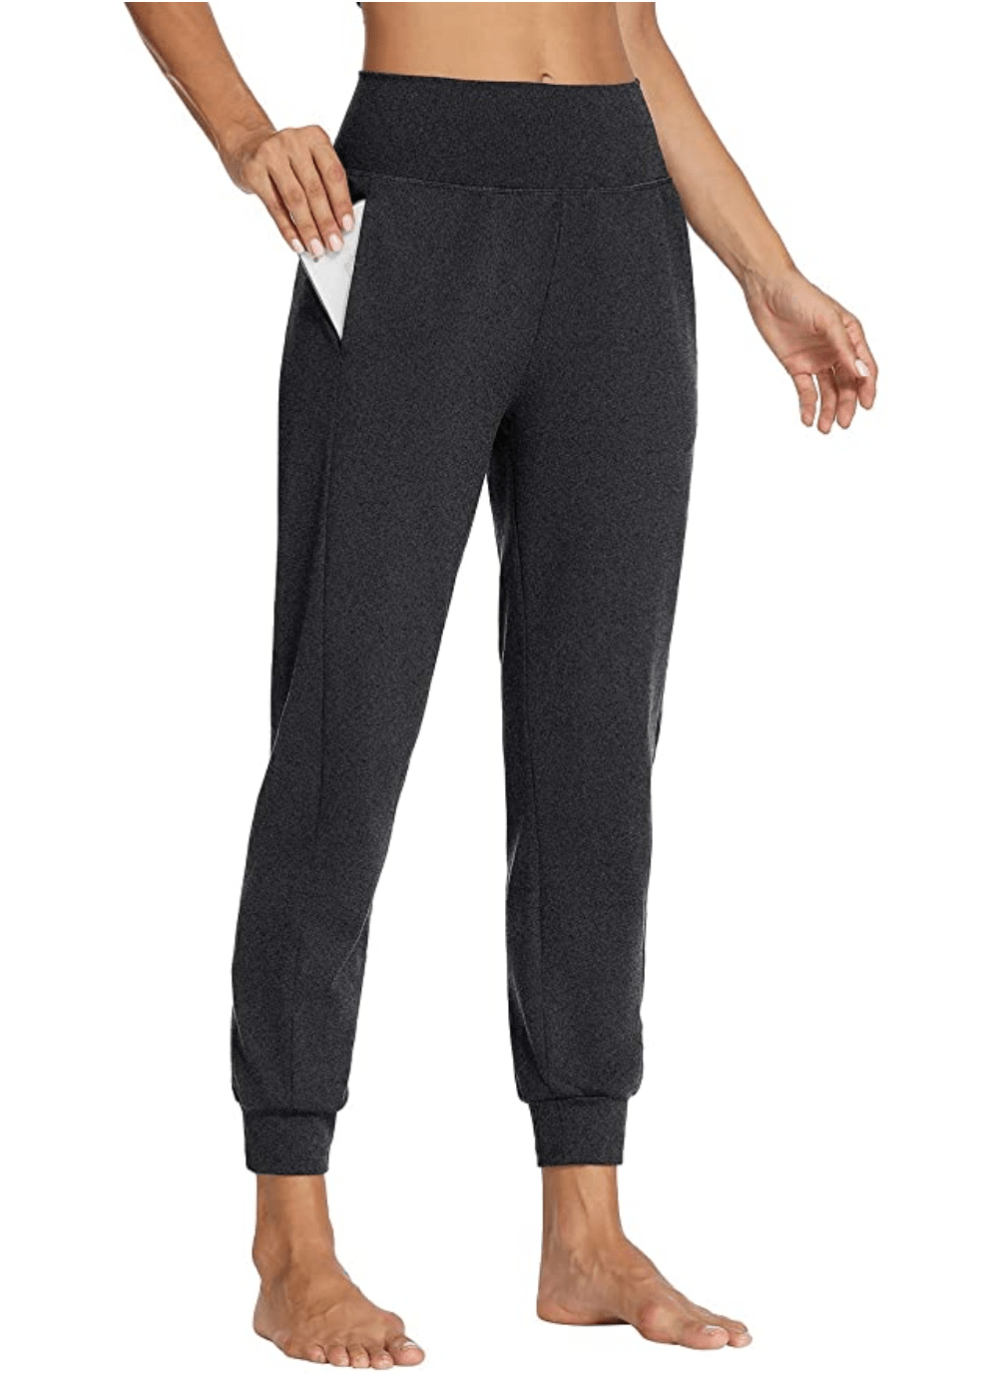 LEXISLOVE Women's Athletic Joggers Comfy Lounge Pants for Women with Pocket